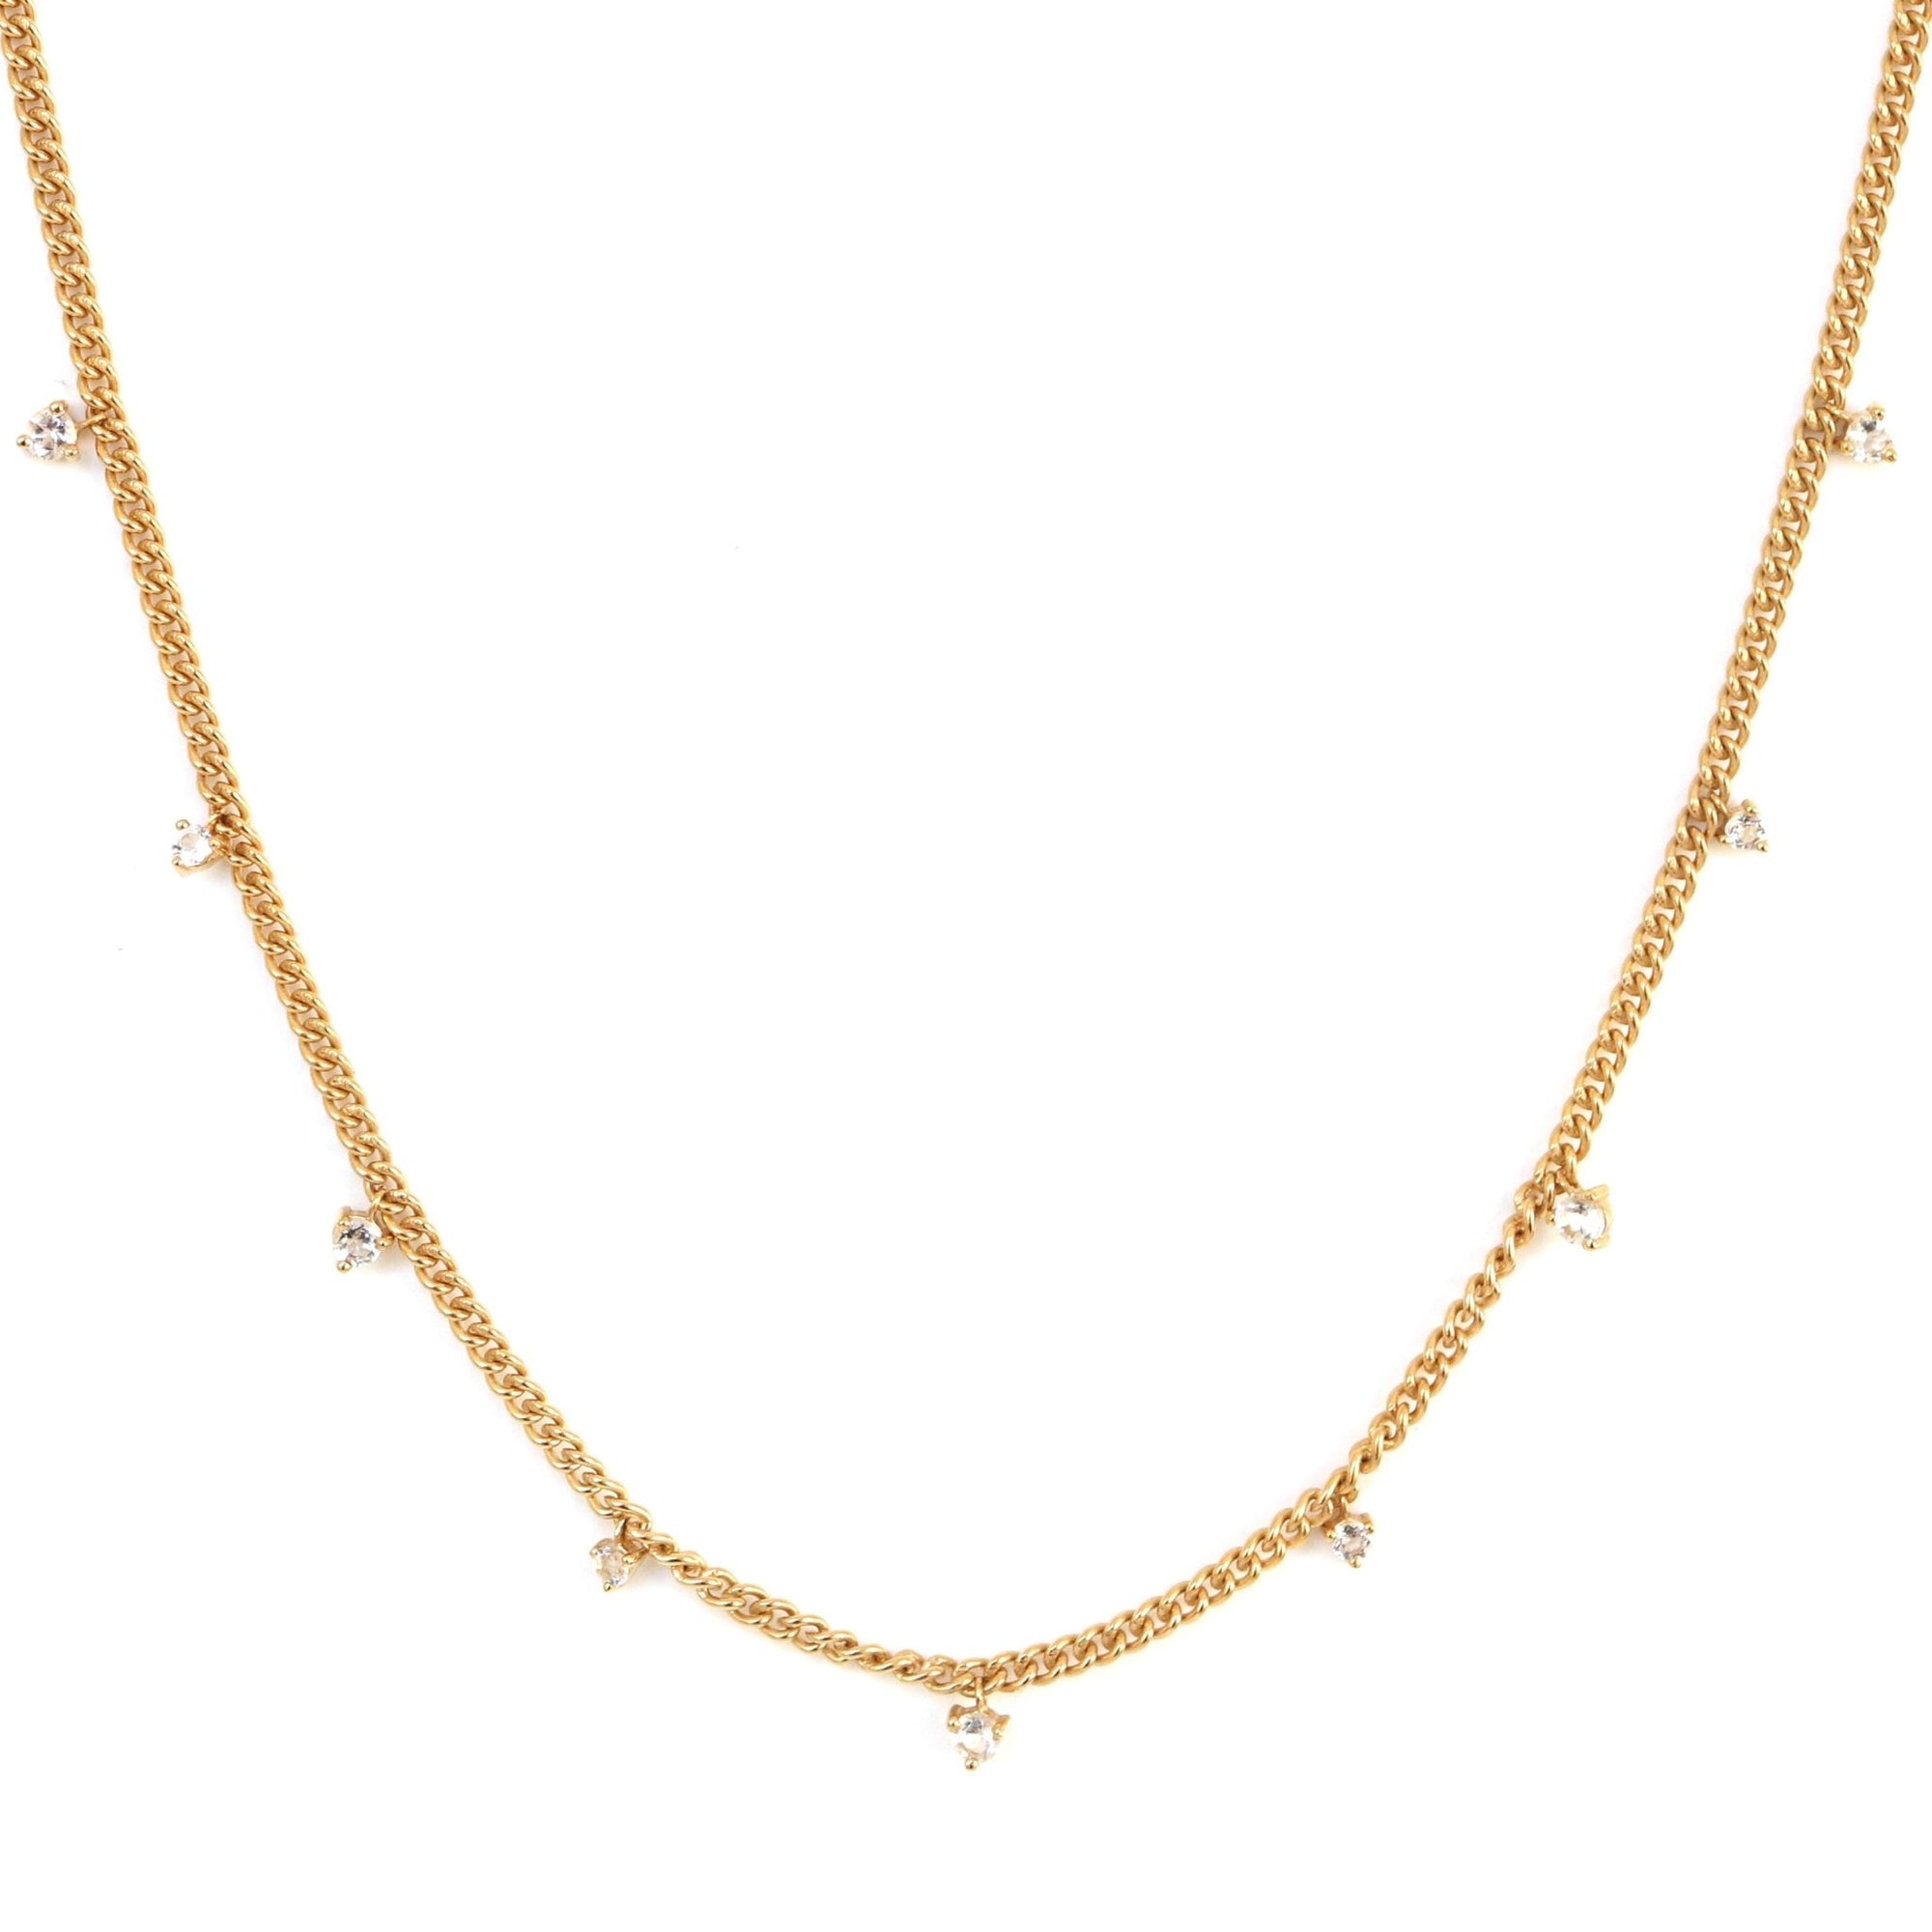 UNITY CROWN CURB LINK NECKLACE - WHITE TOPAZ & GOLD - SO PRETTY CARA COTTER